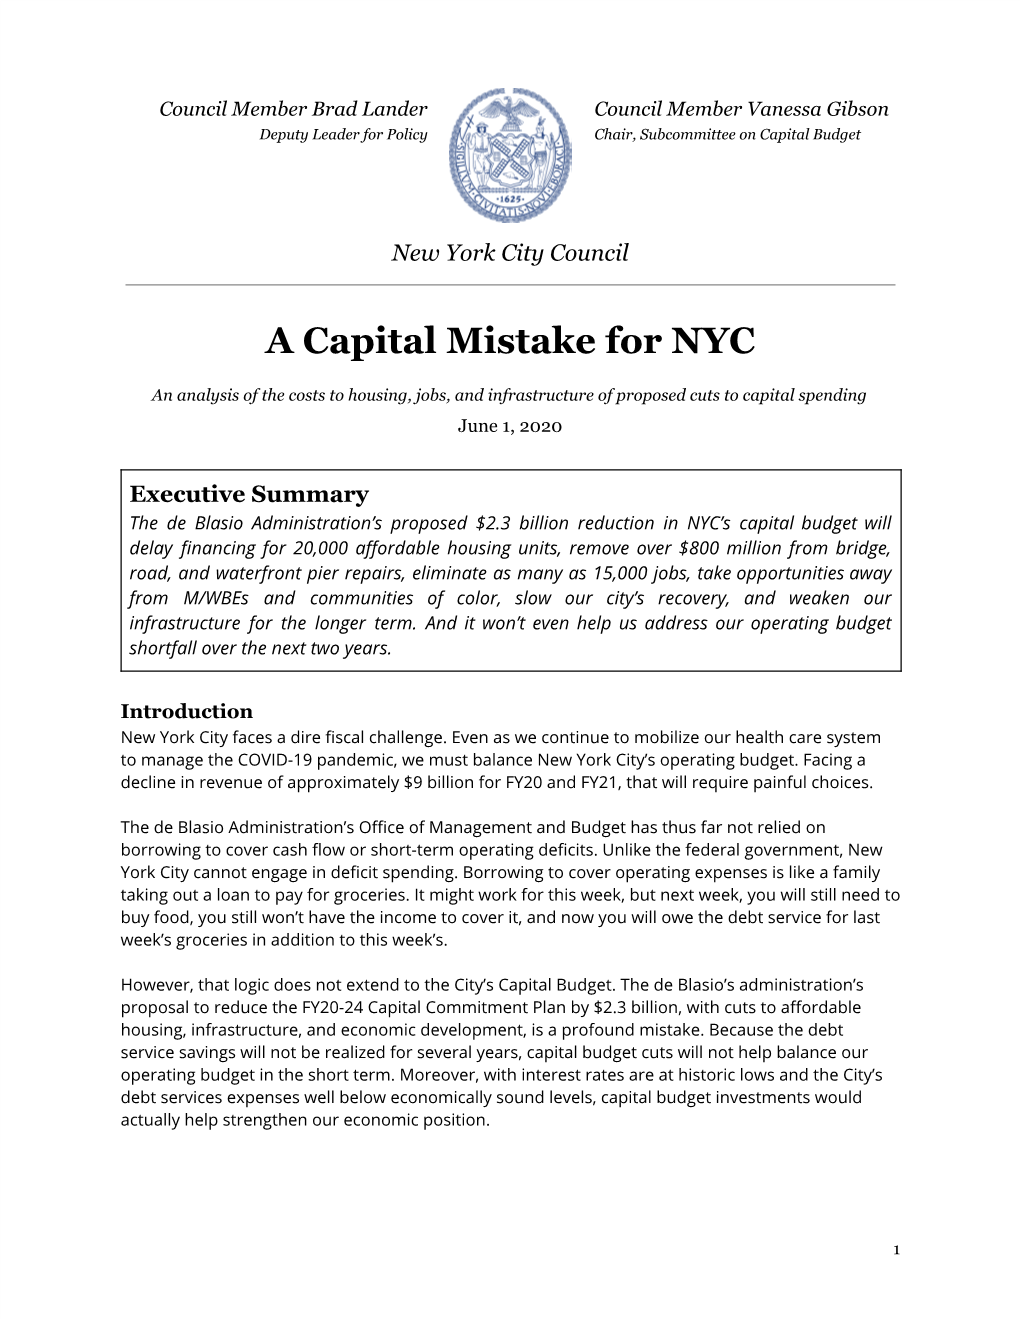 A Capital Mistake for NYC